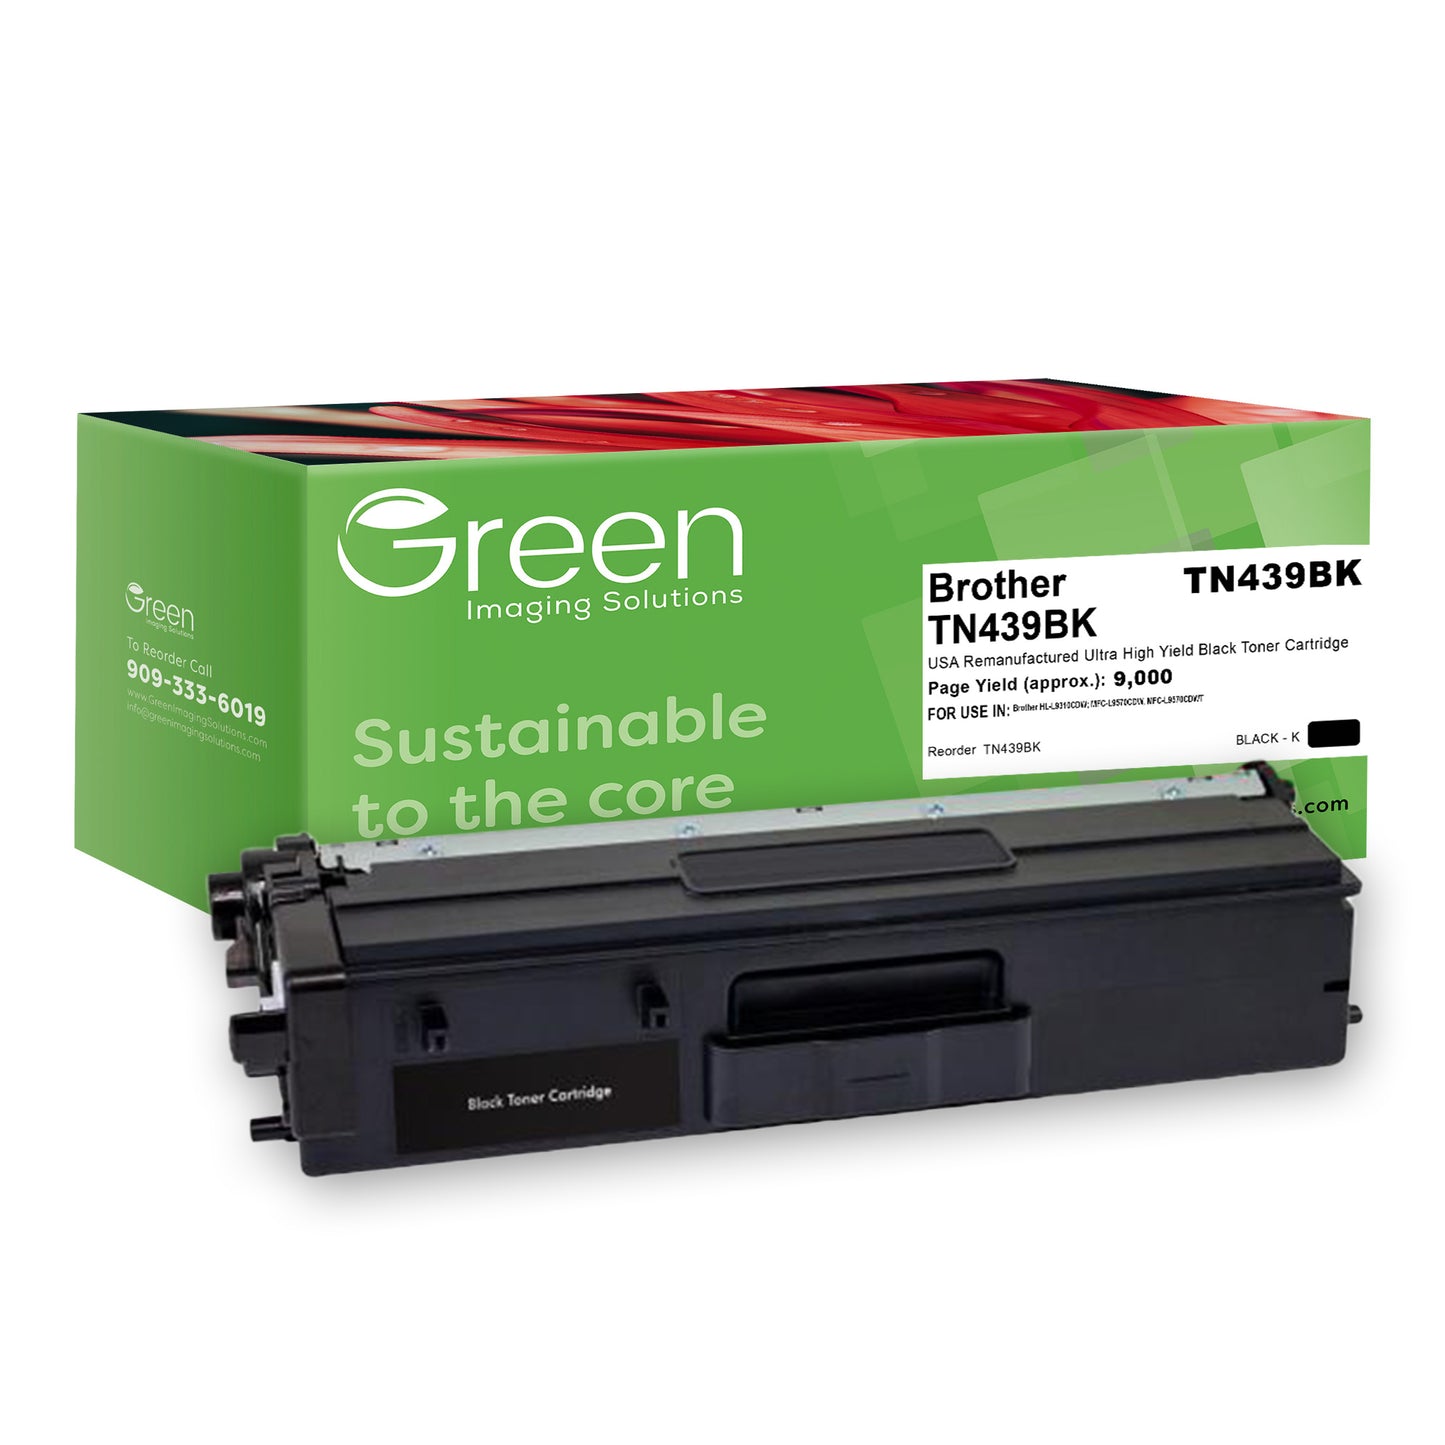 Green Imaging Solutions USA Remanufactured Ultra High Yield Black Toner Cartridge for Brother TN439BK